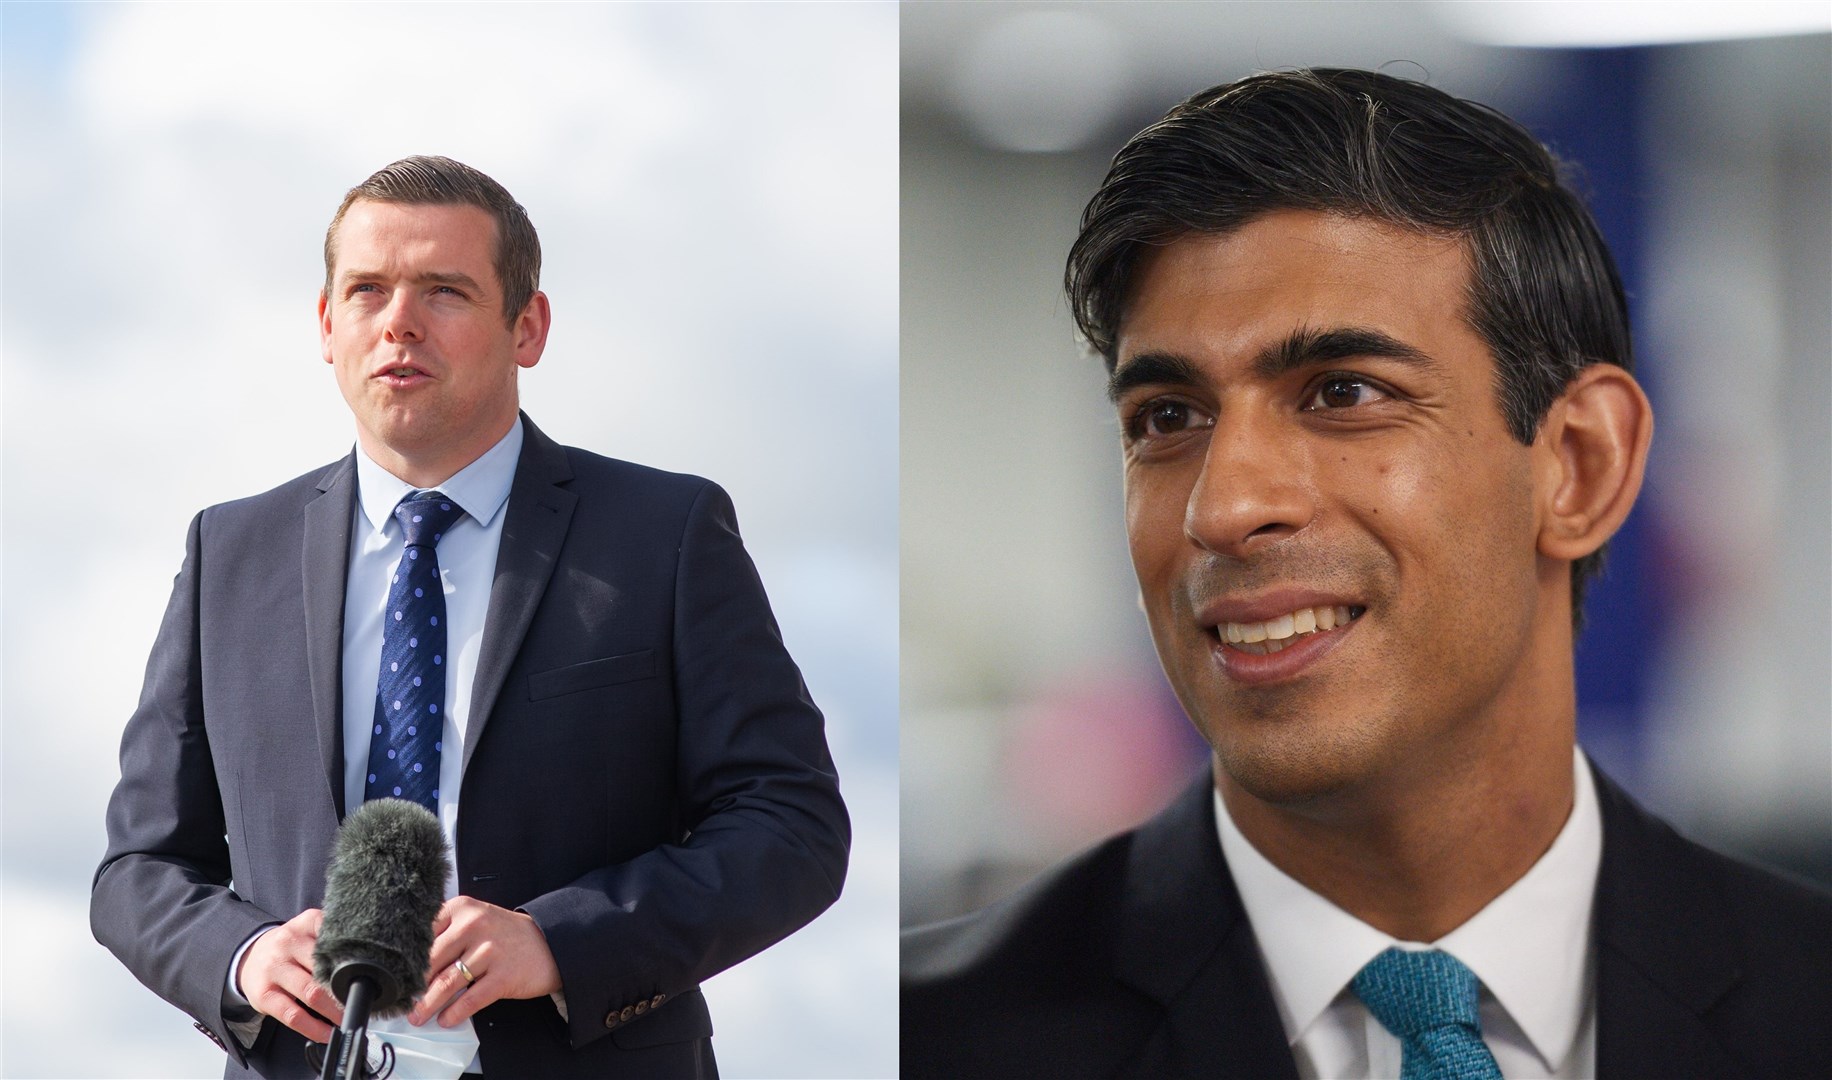 Douglas Ross has congratulated Sunak on being named Prime Minister.